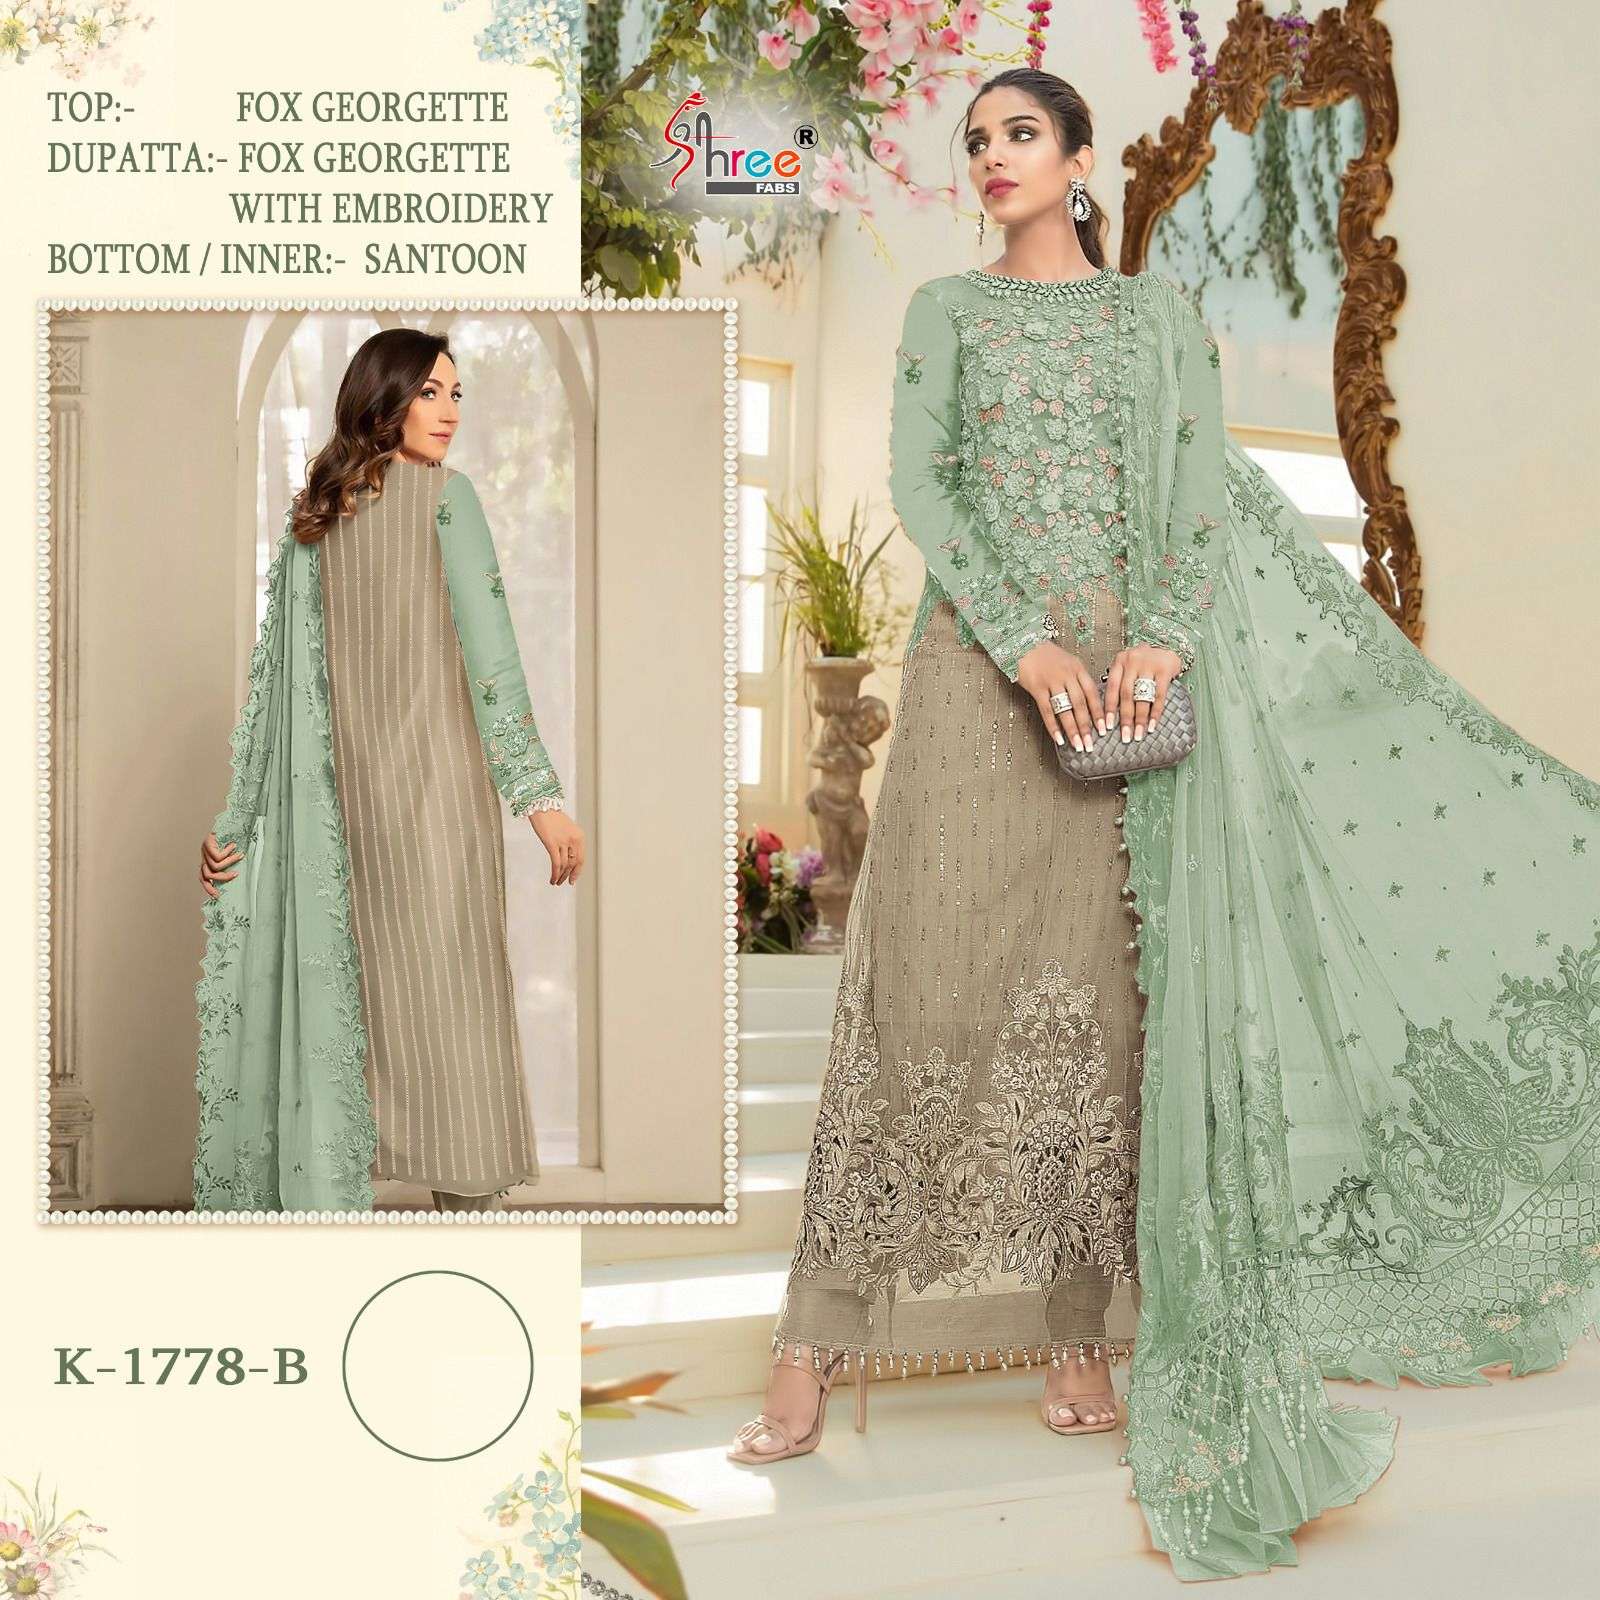 SHREE FABS K 1778 FAUX GEORGETTE EMBROIDERY SALWAR SUITS AT ...